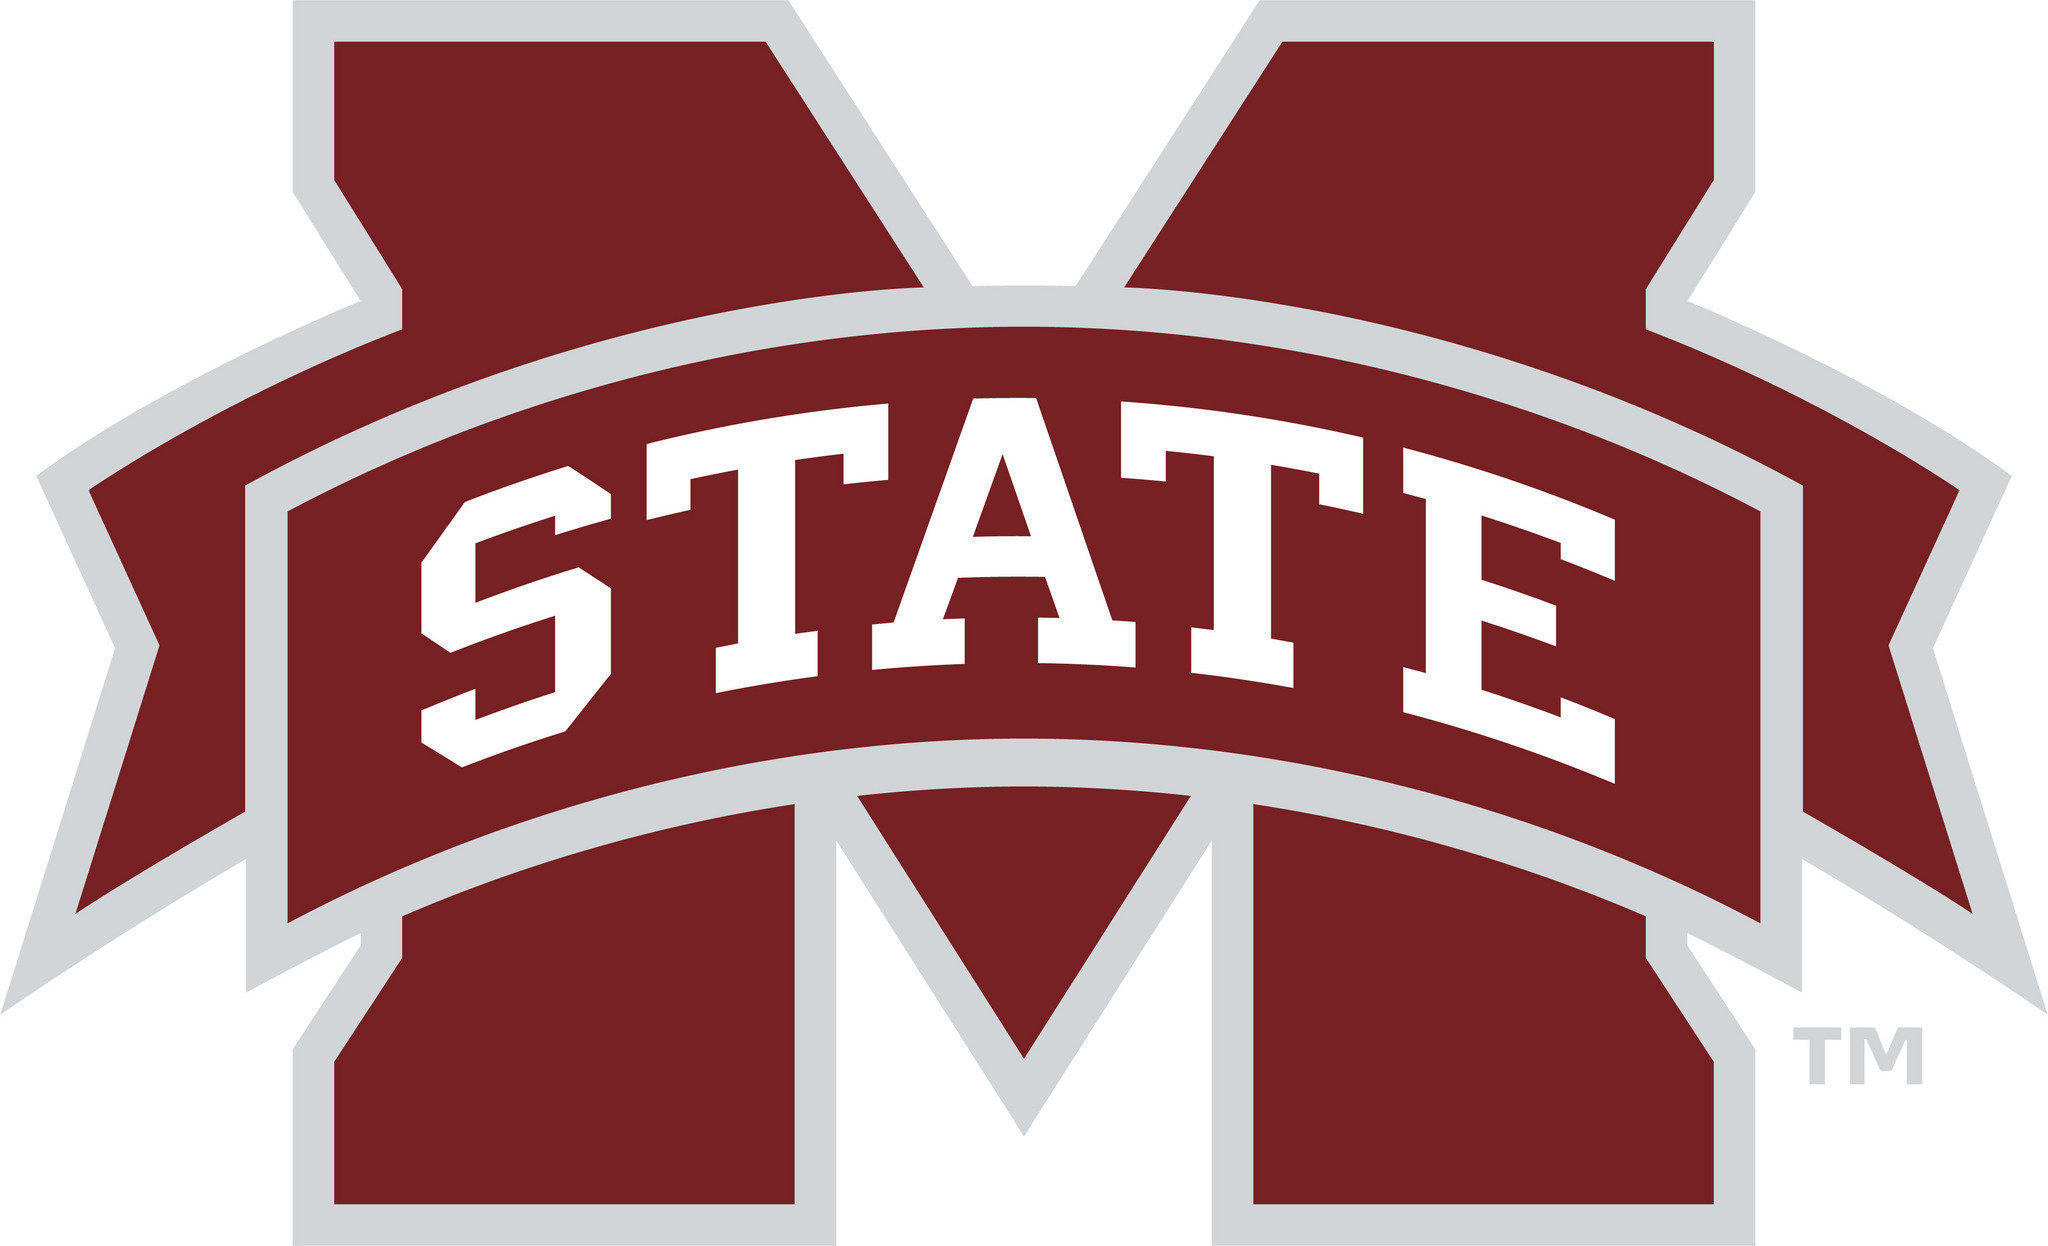 Mississippi State University to offer some degrees in 3 years